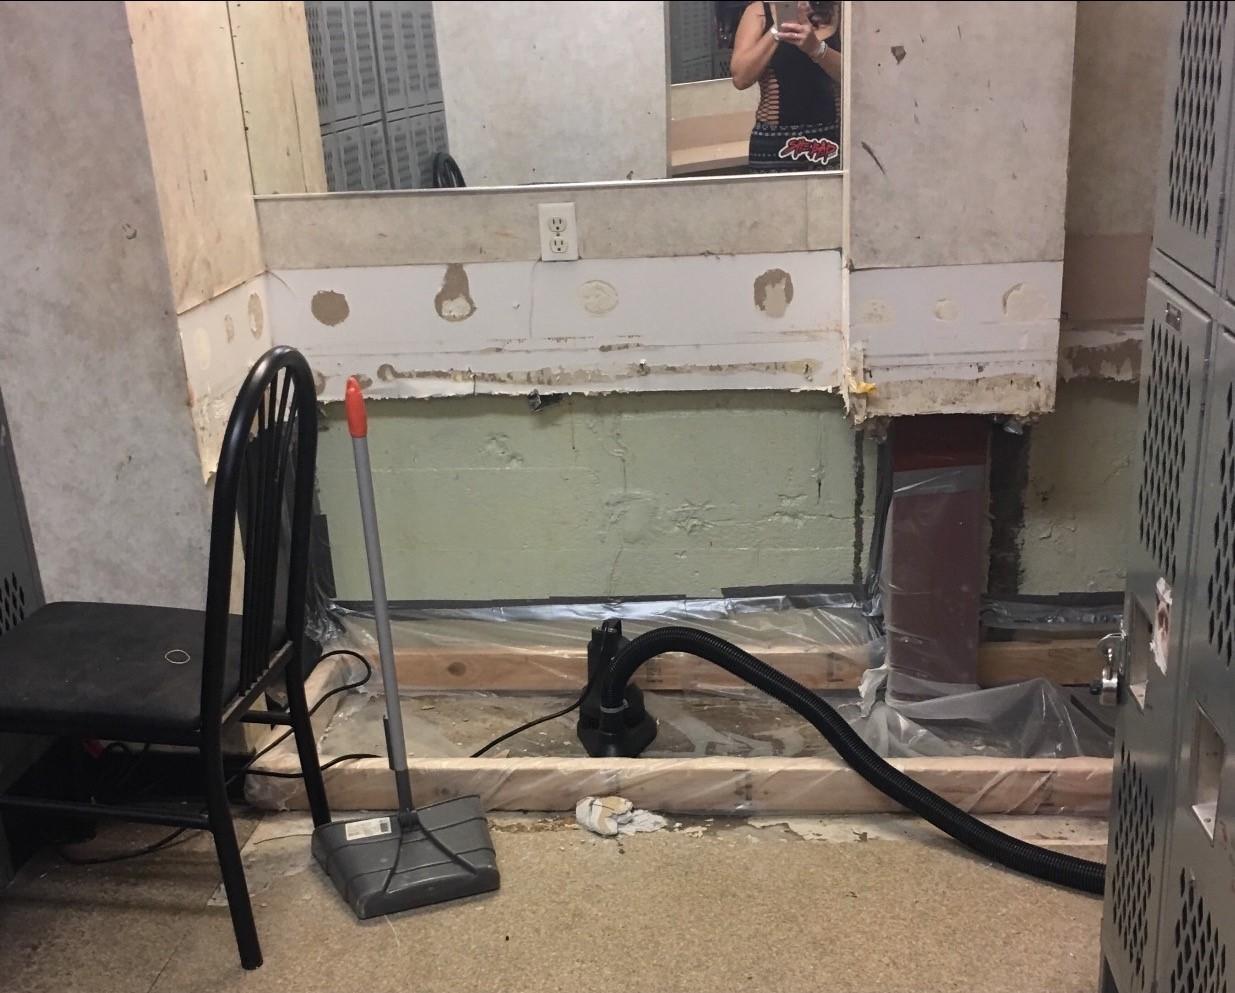 The locker room at Little Darlings, a club owned by Deja Vu. Both of the dancers who spoke at the hearing worked here and at other Deja Vu clubs. The locker room regularly has standing water from flooding, which sometimes spills onto the dance floor. CREDIT: WORKING WA